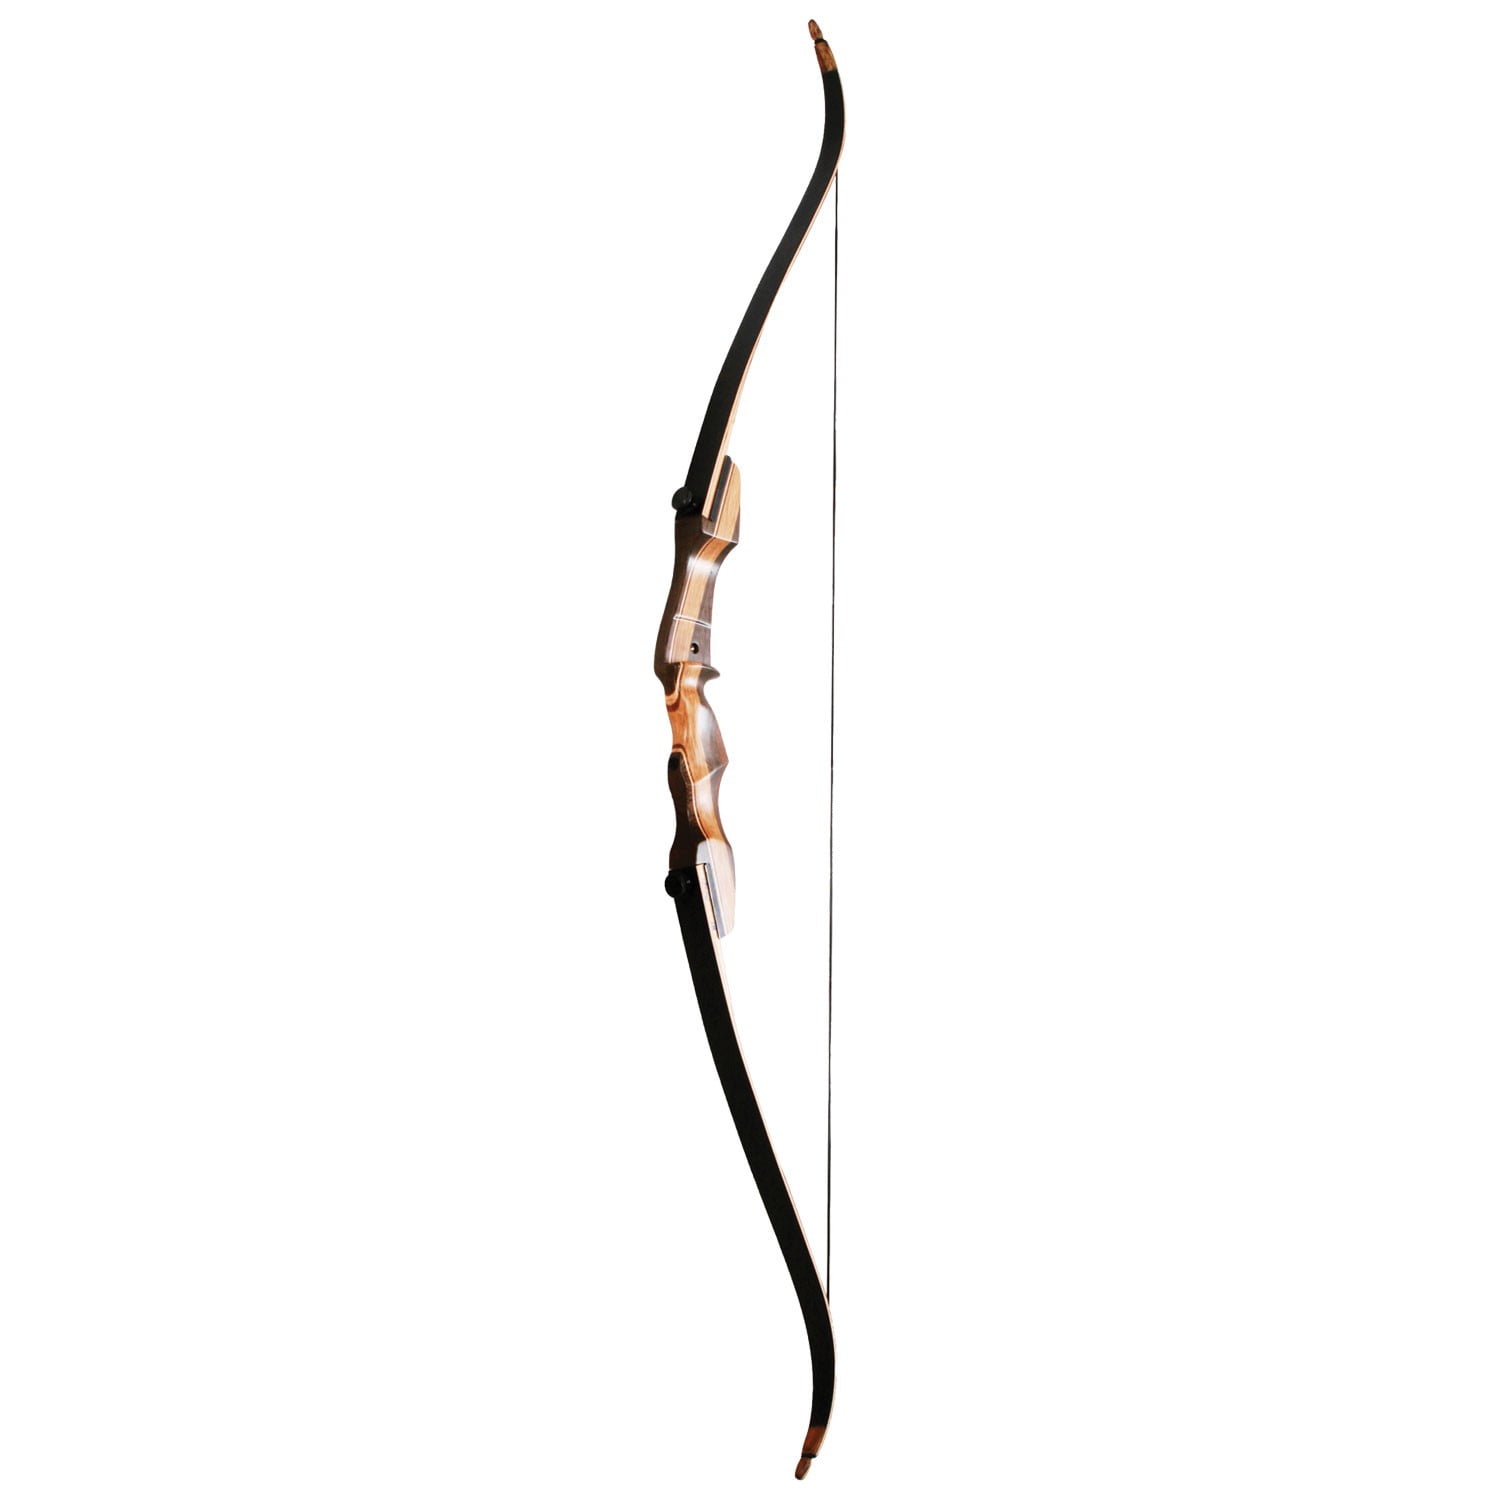 Details about   30lbs/40lbs Takedown Recurve Bow For Archery Bow Shooting Hunting Game Hunger 